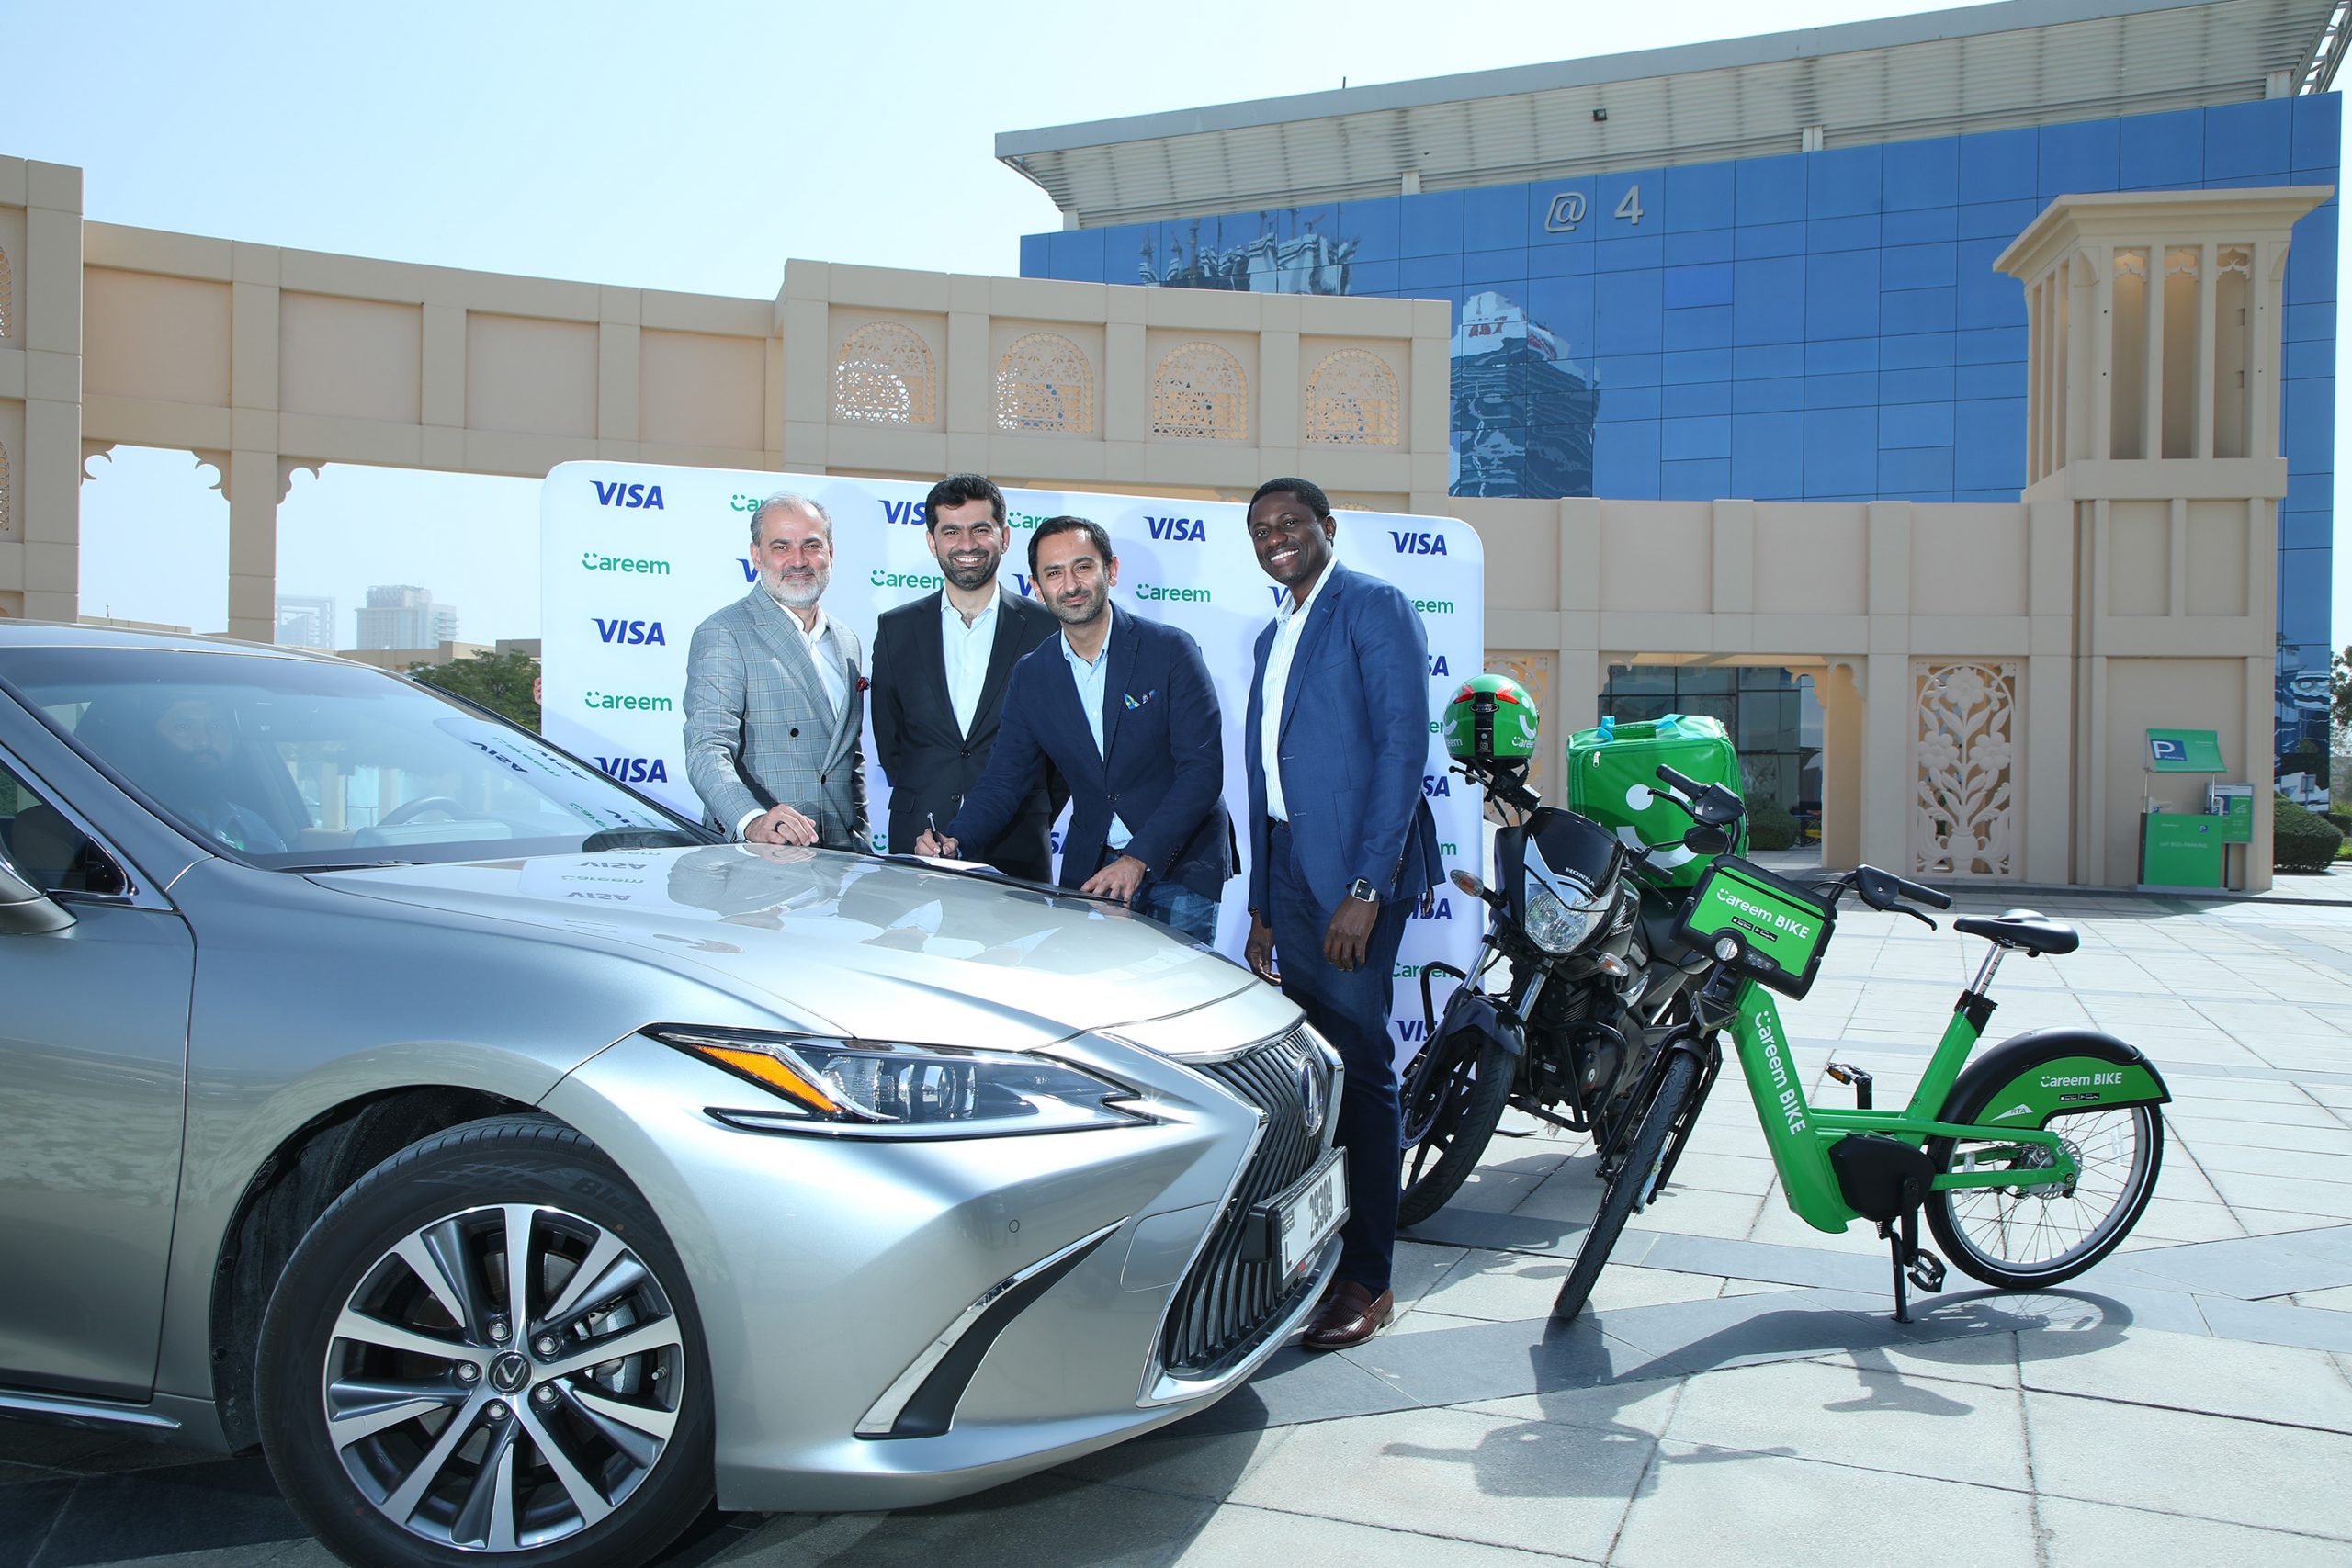 Careem And Visa Sign Landmark Partnership To Accelerate Cashless Payments And Digital Financial Inclusion Across Middle East And North Africa Region